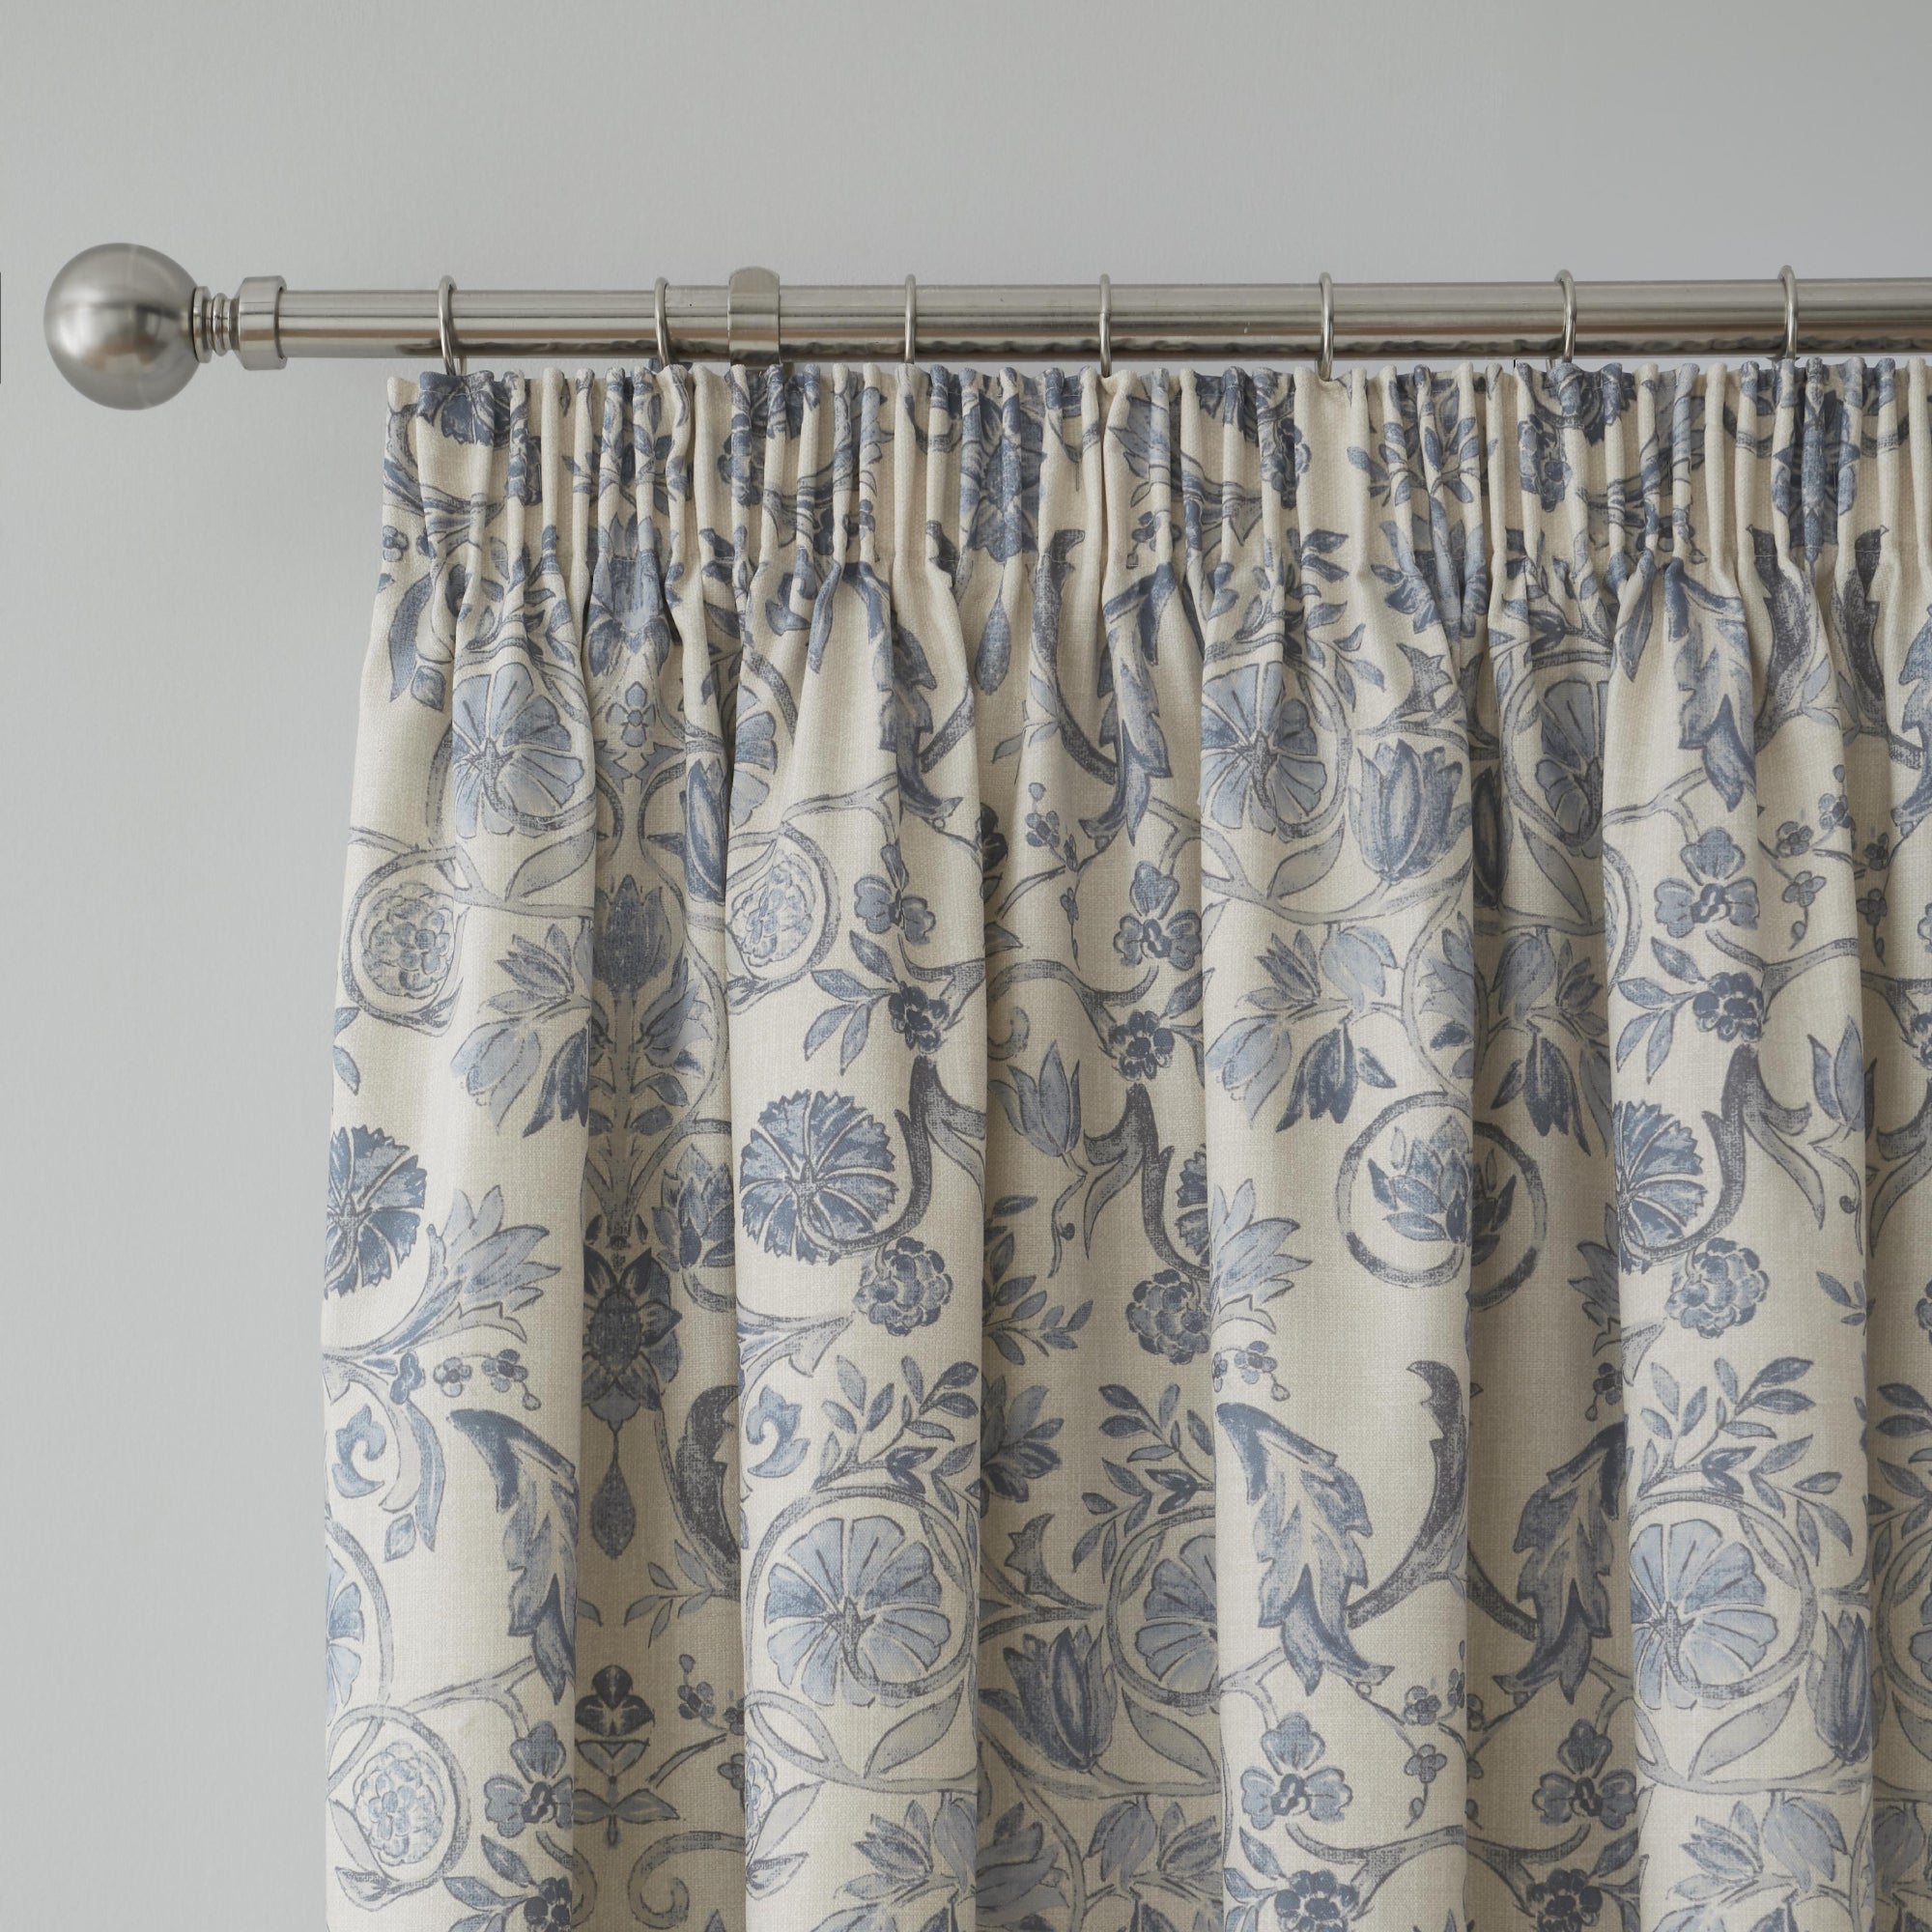 Pair of Pencil Pleat Curtains With Tie-Backs Averie by Dreams & Drapes Design in Blue